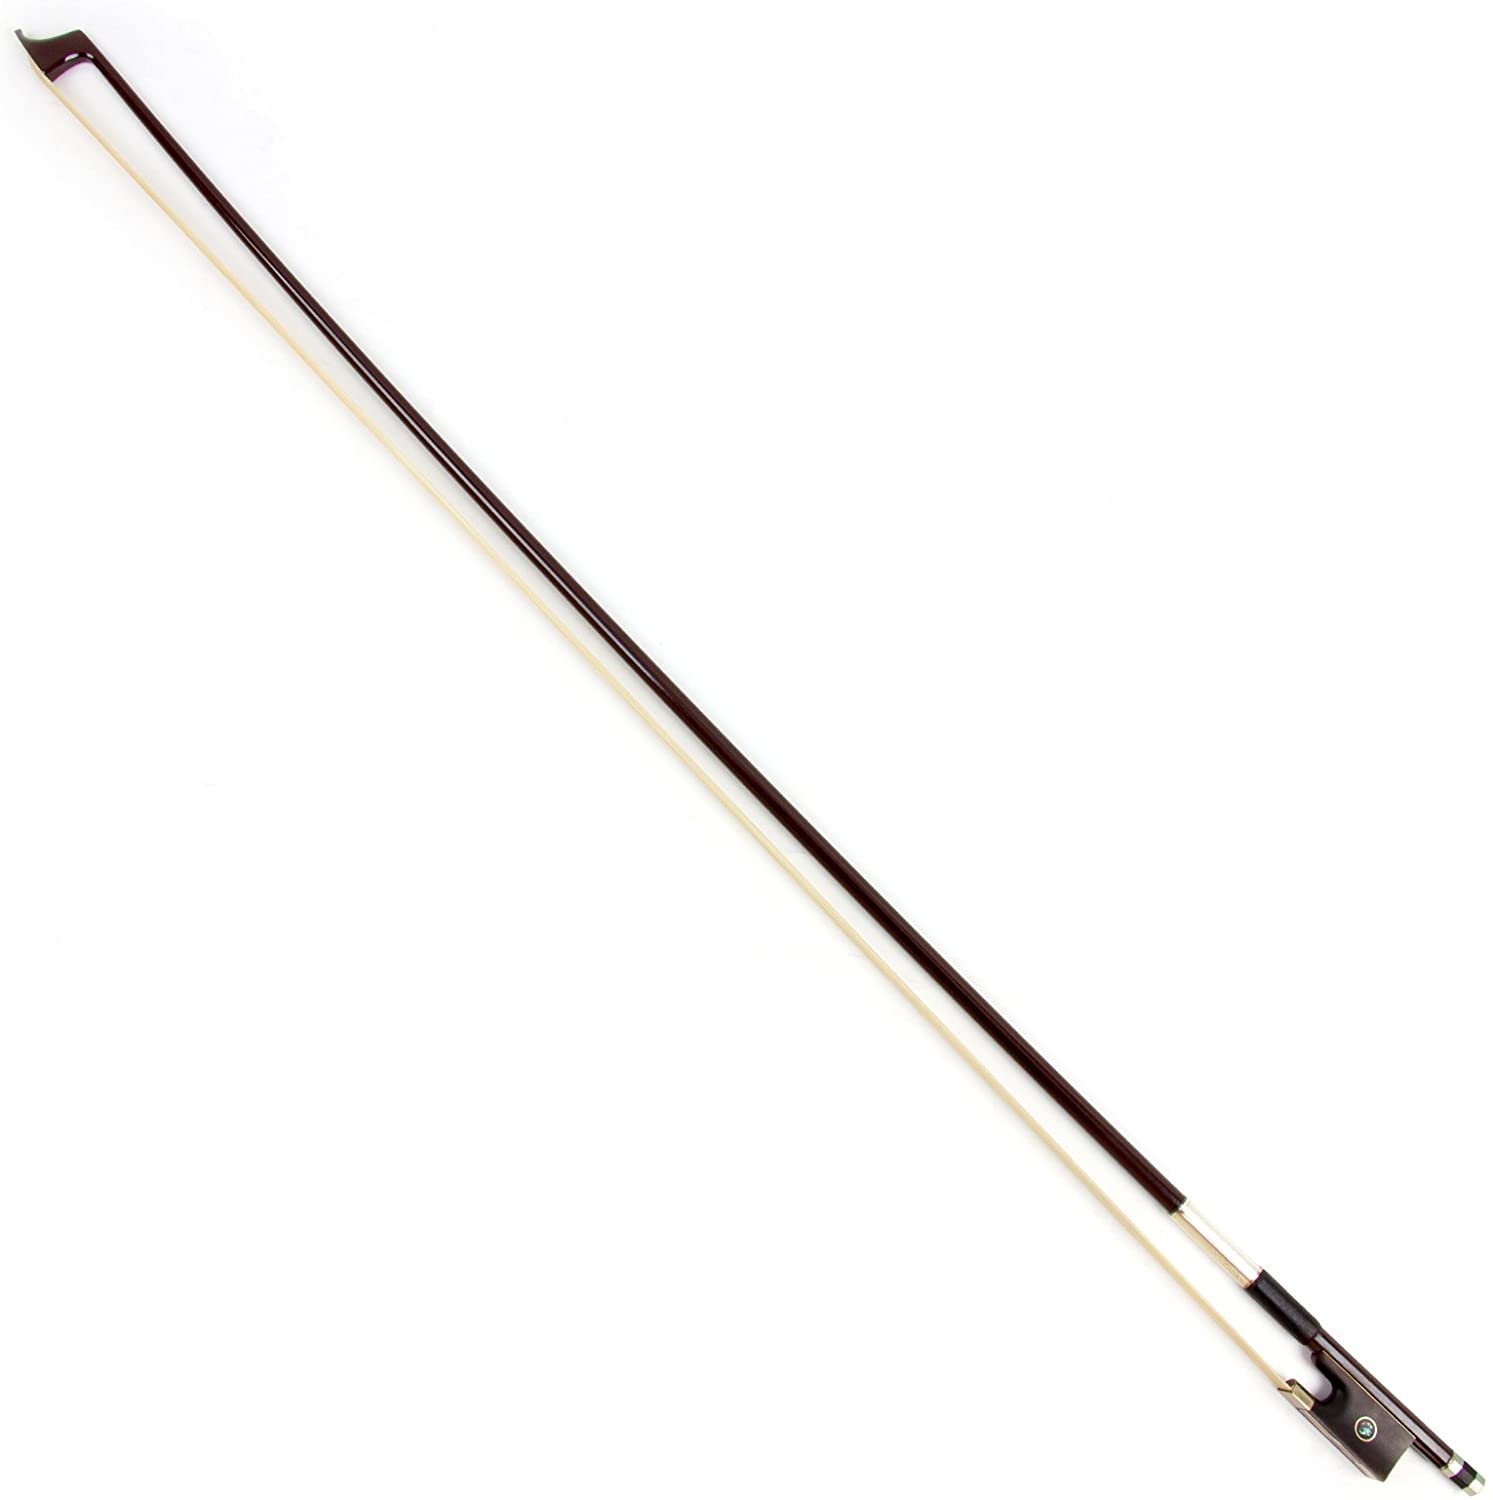 Violin Bow Stunning Fiddle Bow Carbon Fiber for Violins (4/4, Coffee) - AKLOT